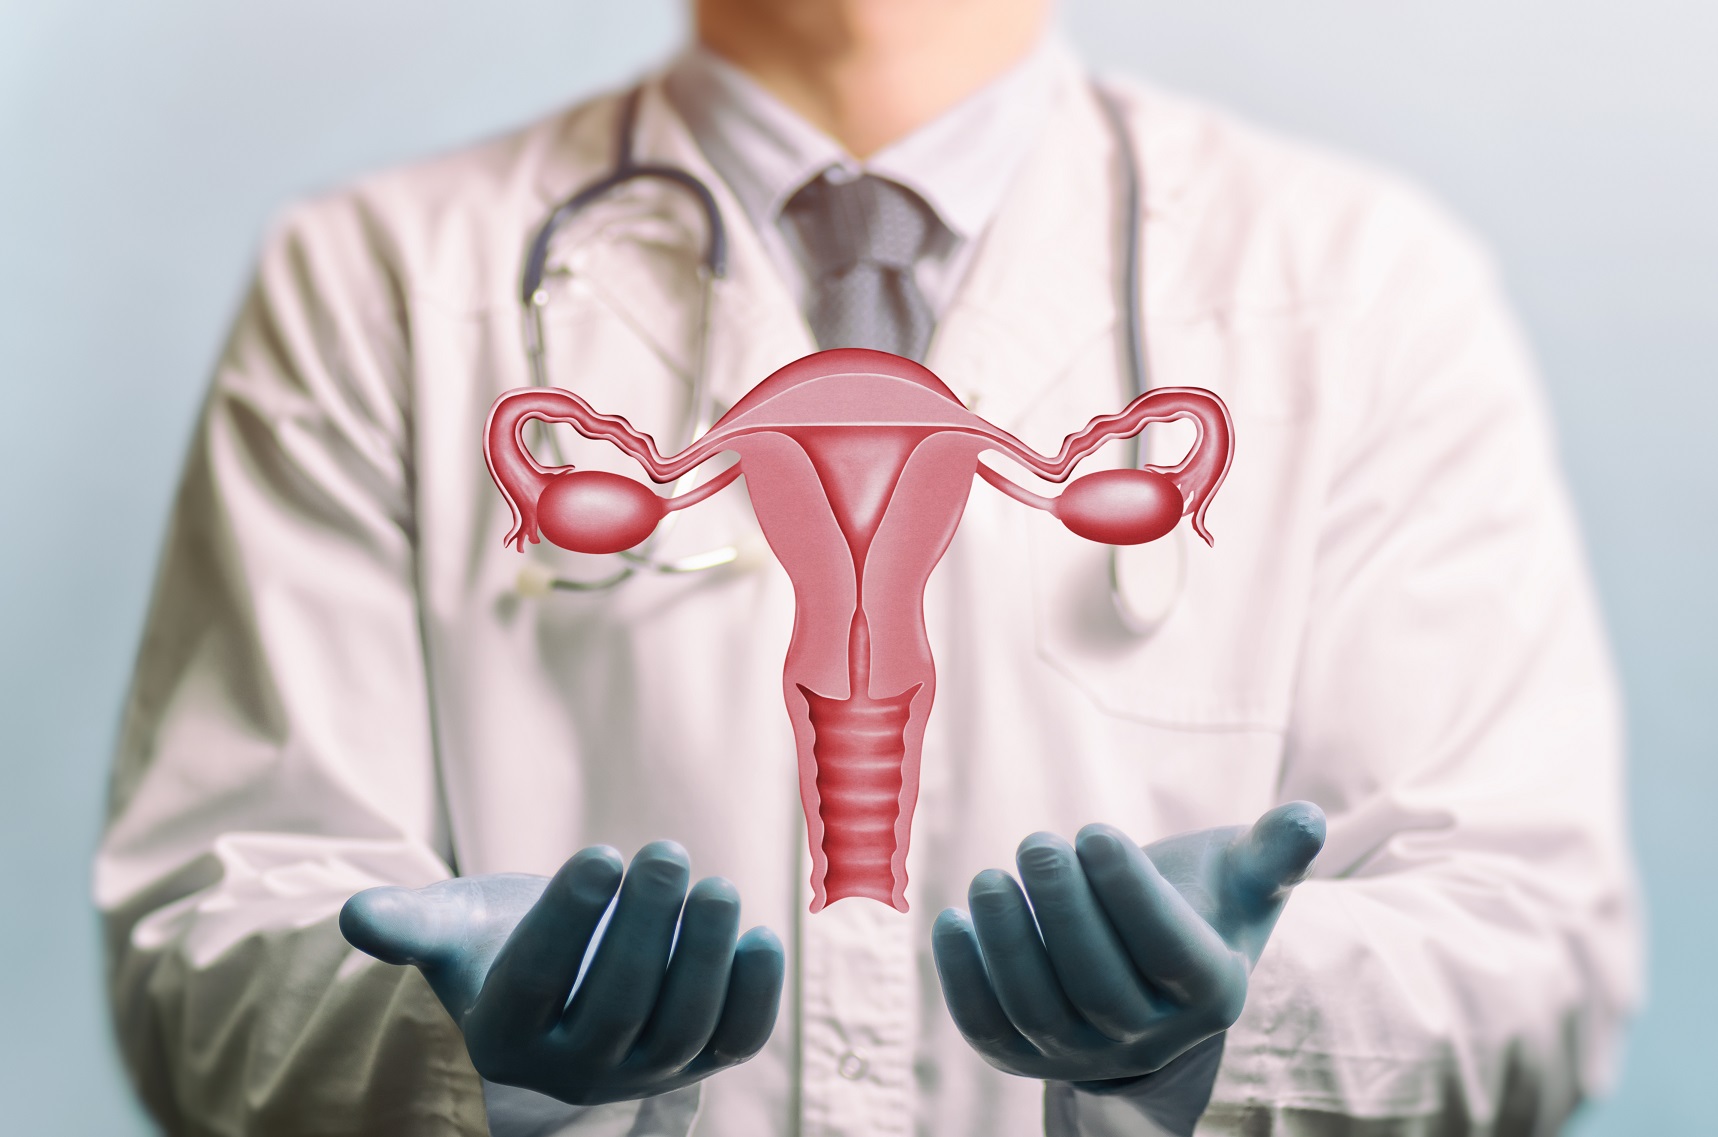 Common Gynecological Conditions: Symptoms & Treatments